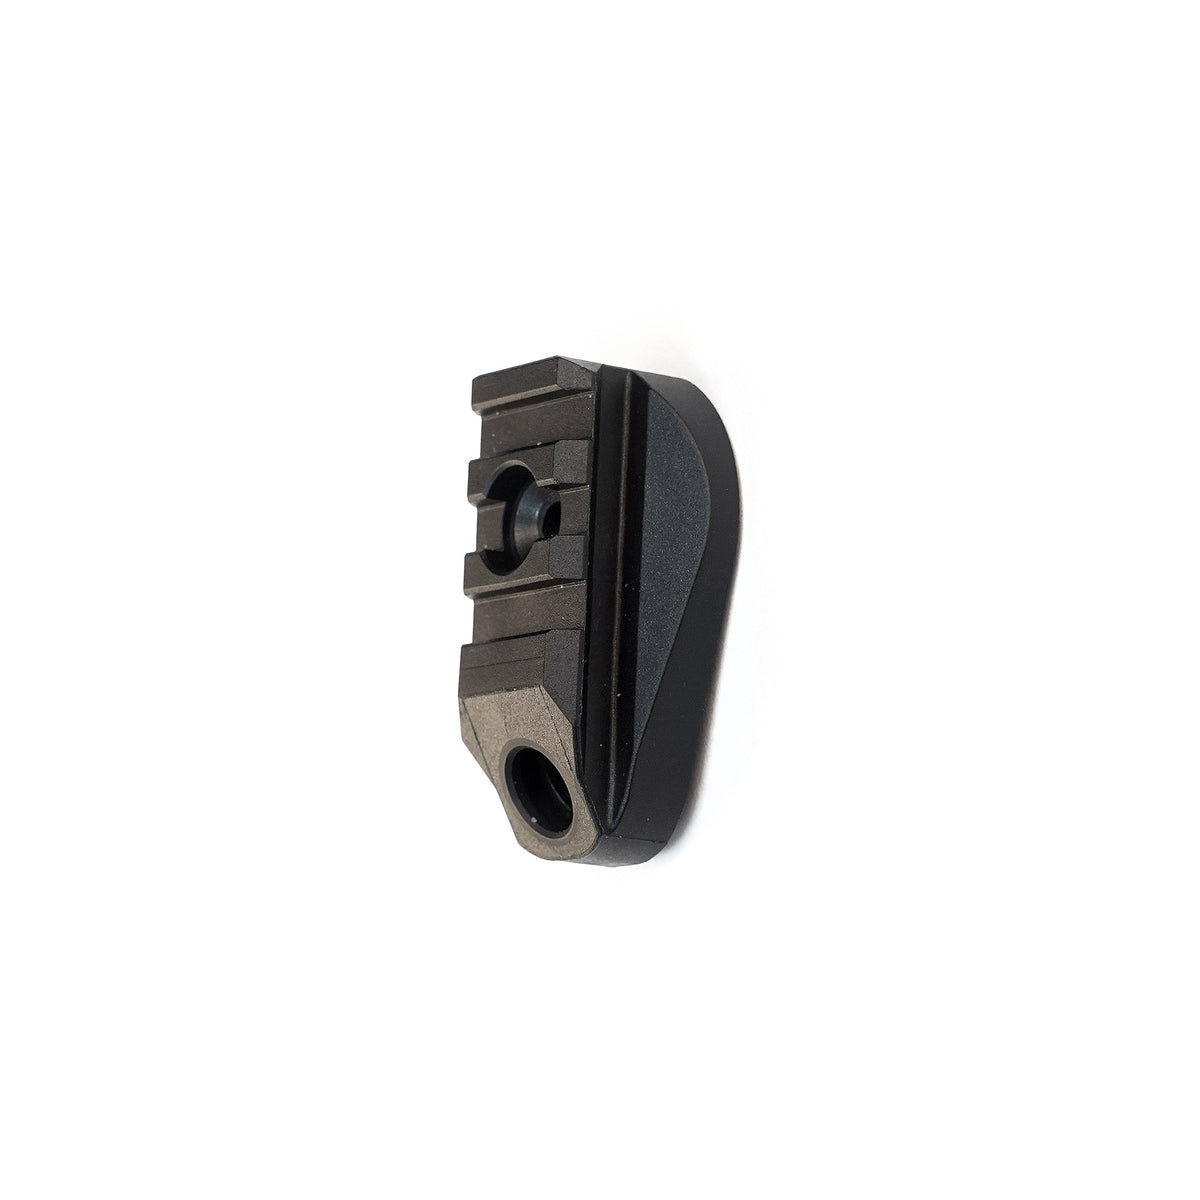 Wolverine Picatinny Stock Adapter with QD Point